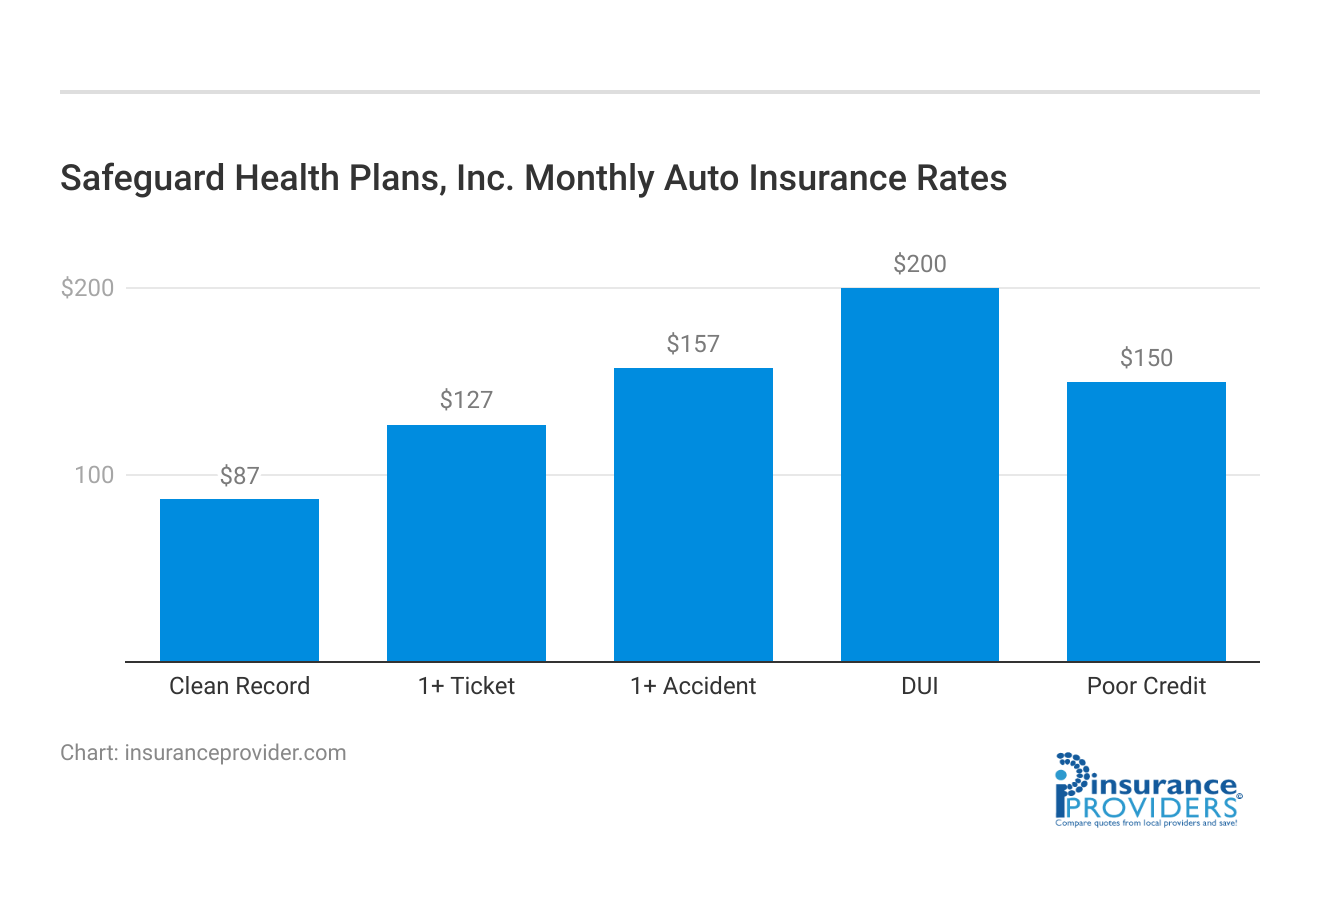 <h3>Safeguard Health Plans, Inc. Monthly Auto Insurance Rates</h3>